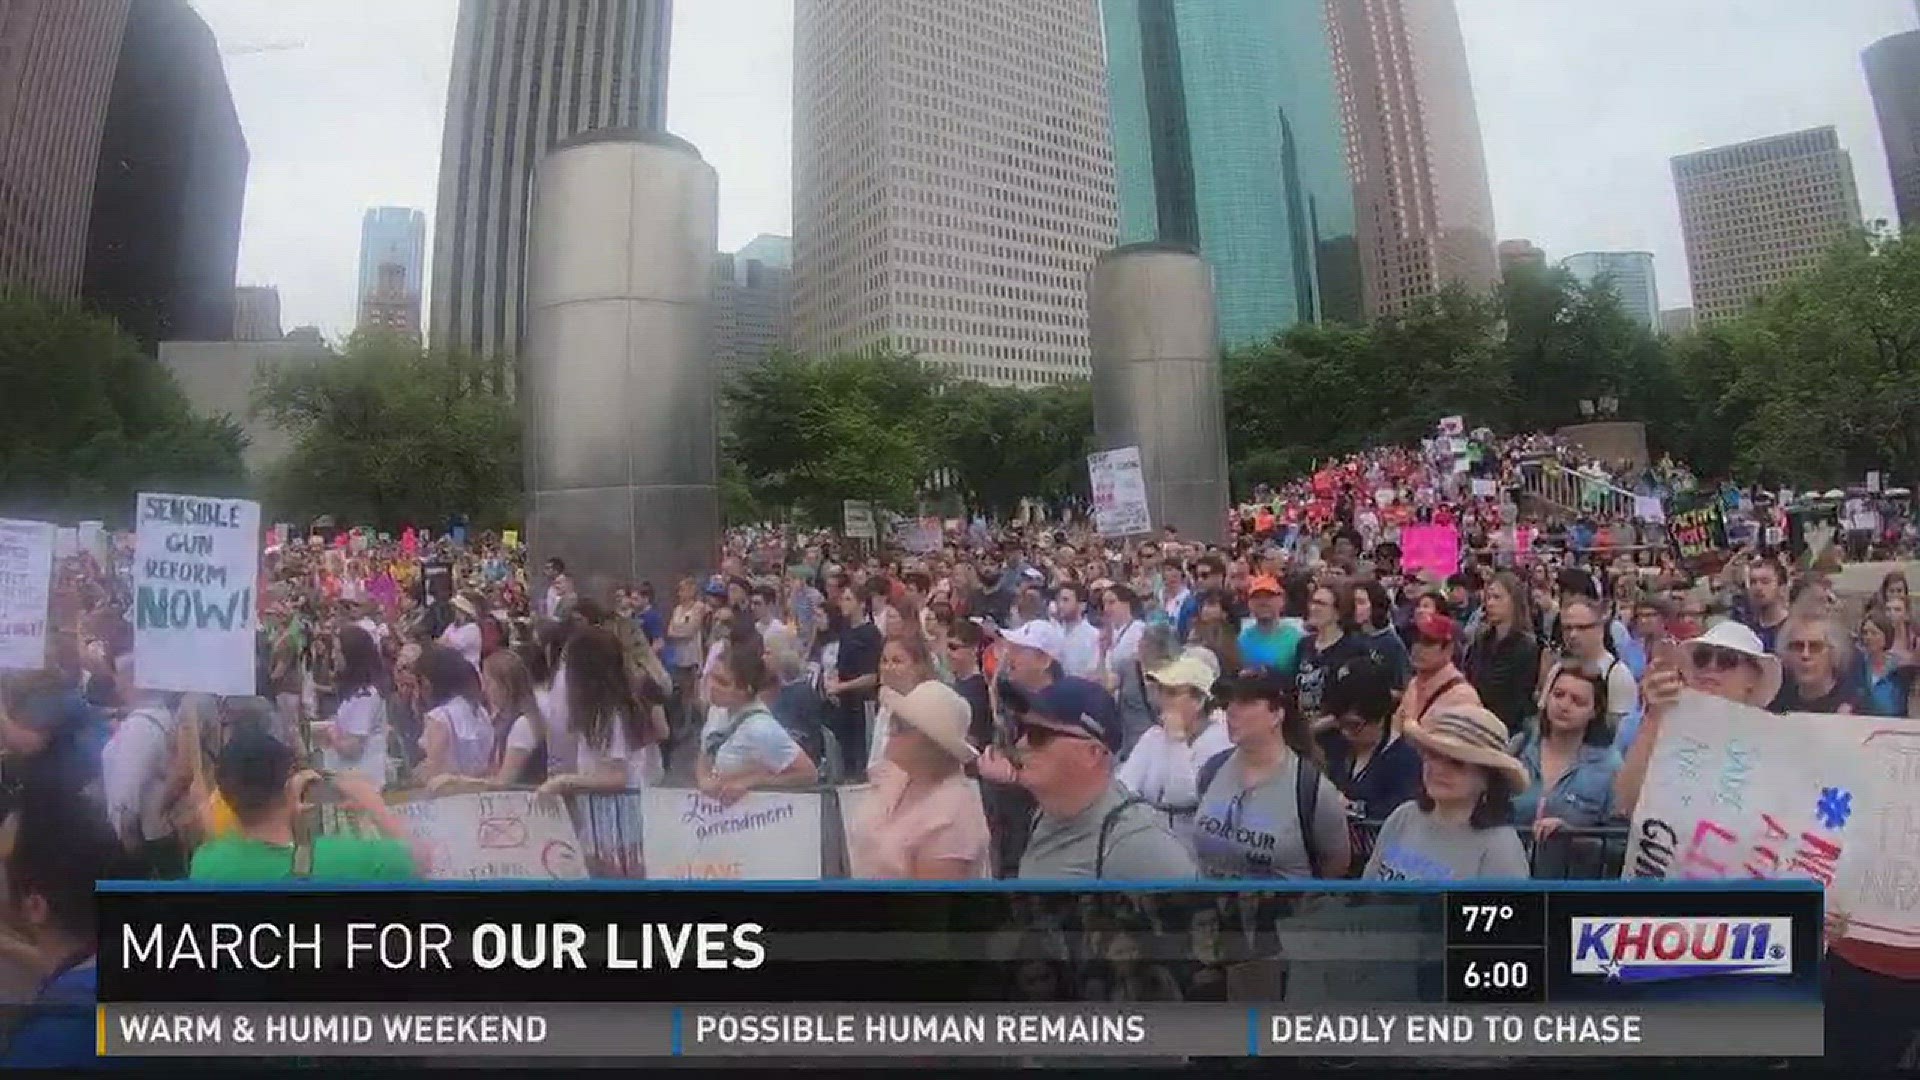 Tens of thousands of Houston students joined millions across the country to demand change in gun laws before any more lives are lost in school shootings.